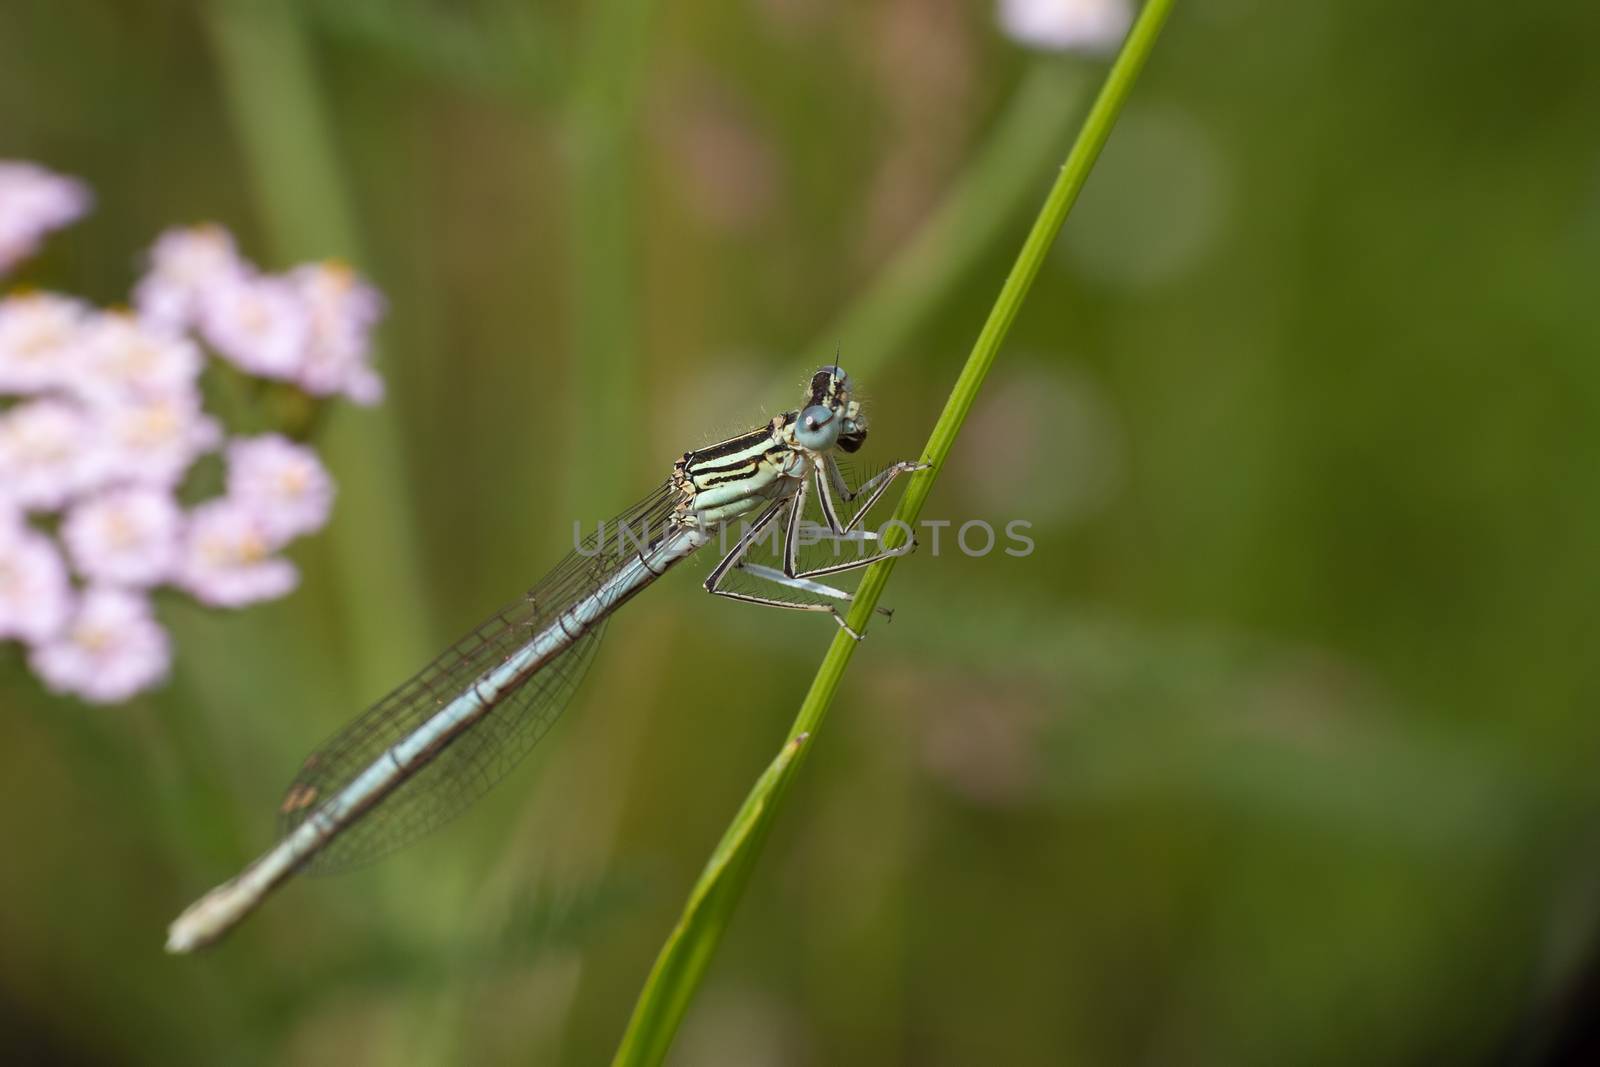 Blue dragonfly on a green blade of grass